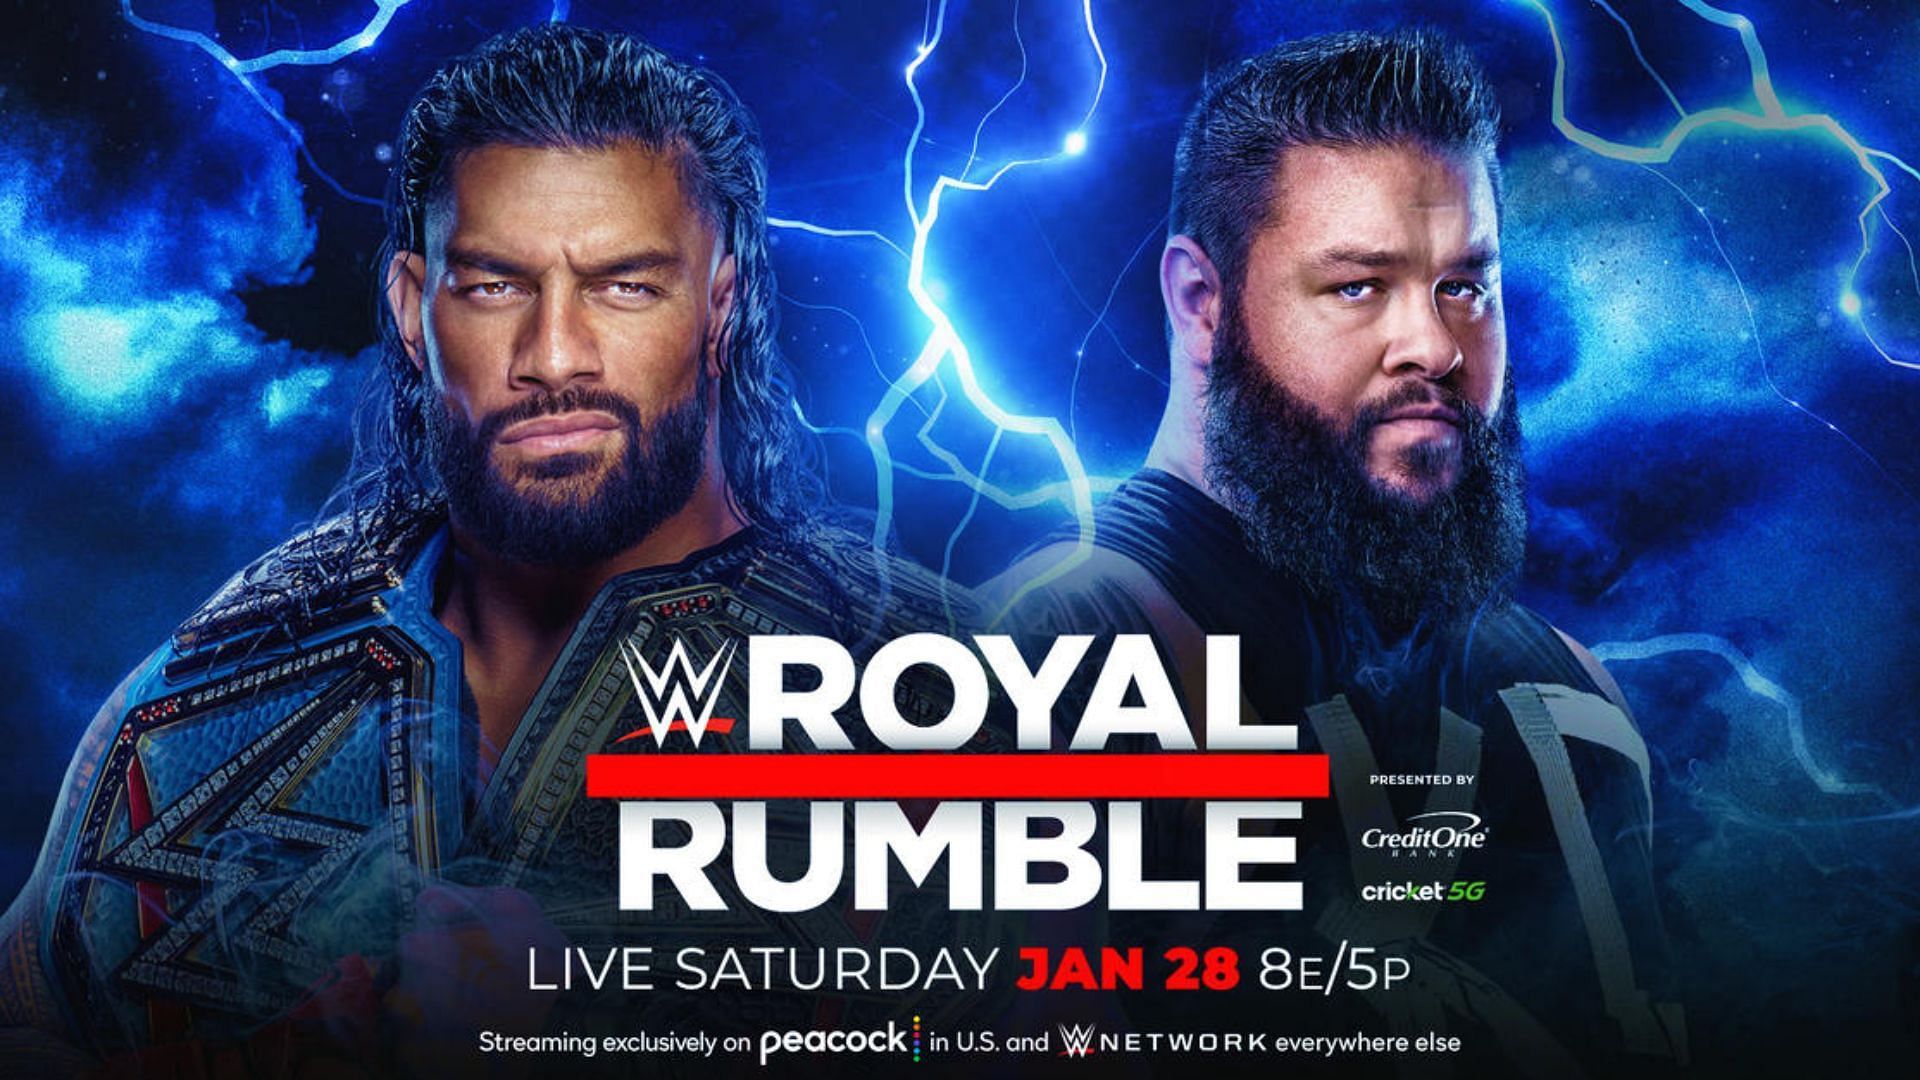 Roman Reigns will go to war against KO at WWE Royal Rumble 2023